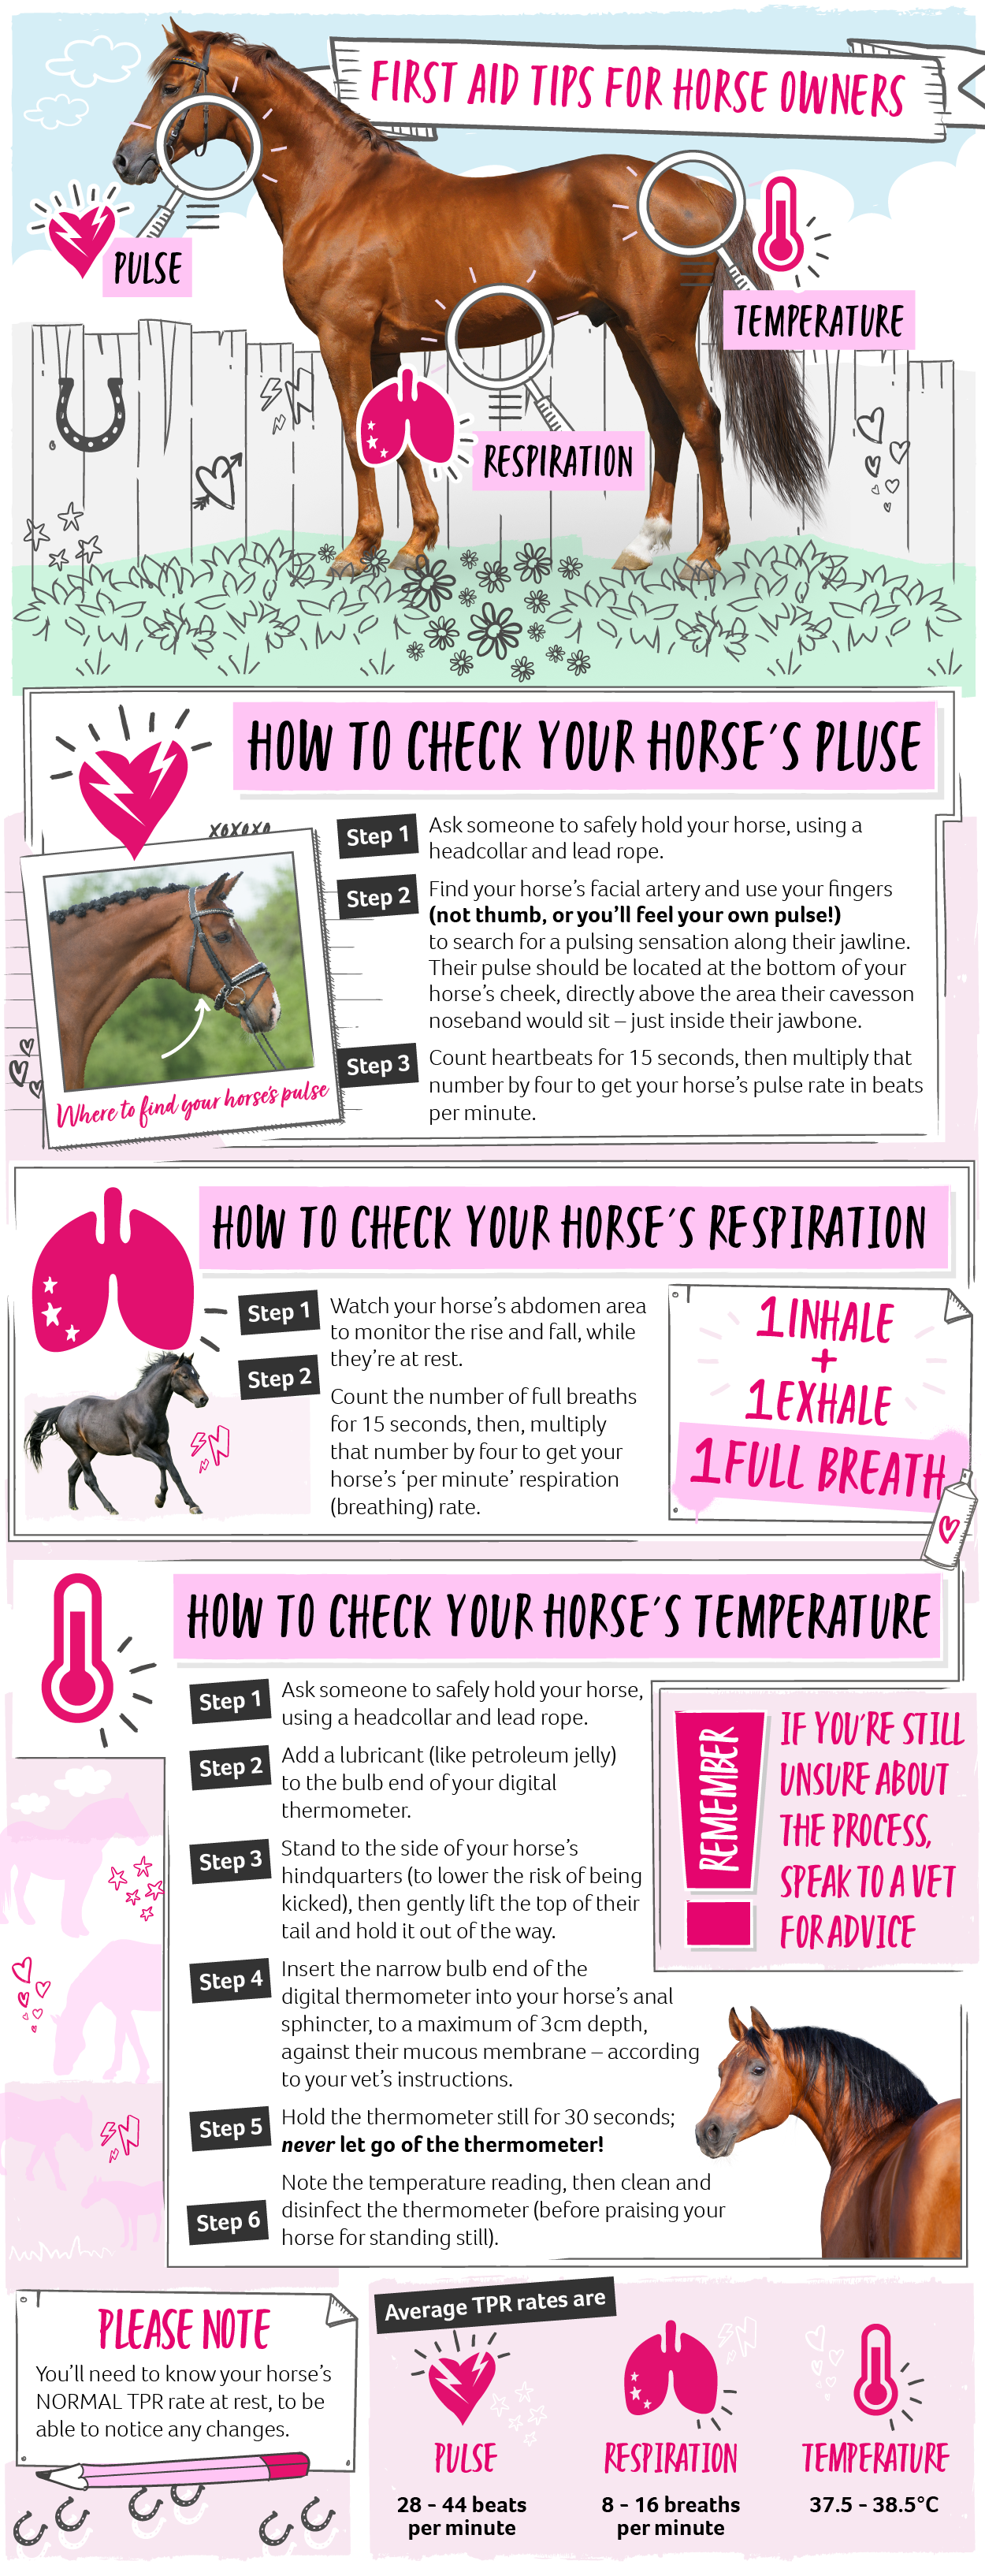 Infographic explaining how to take a horse's temperature, pulse, and respiration (TPR) rates